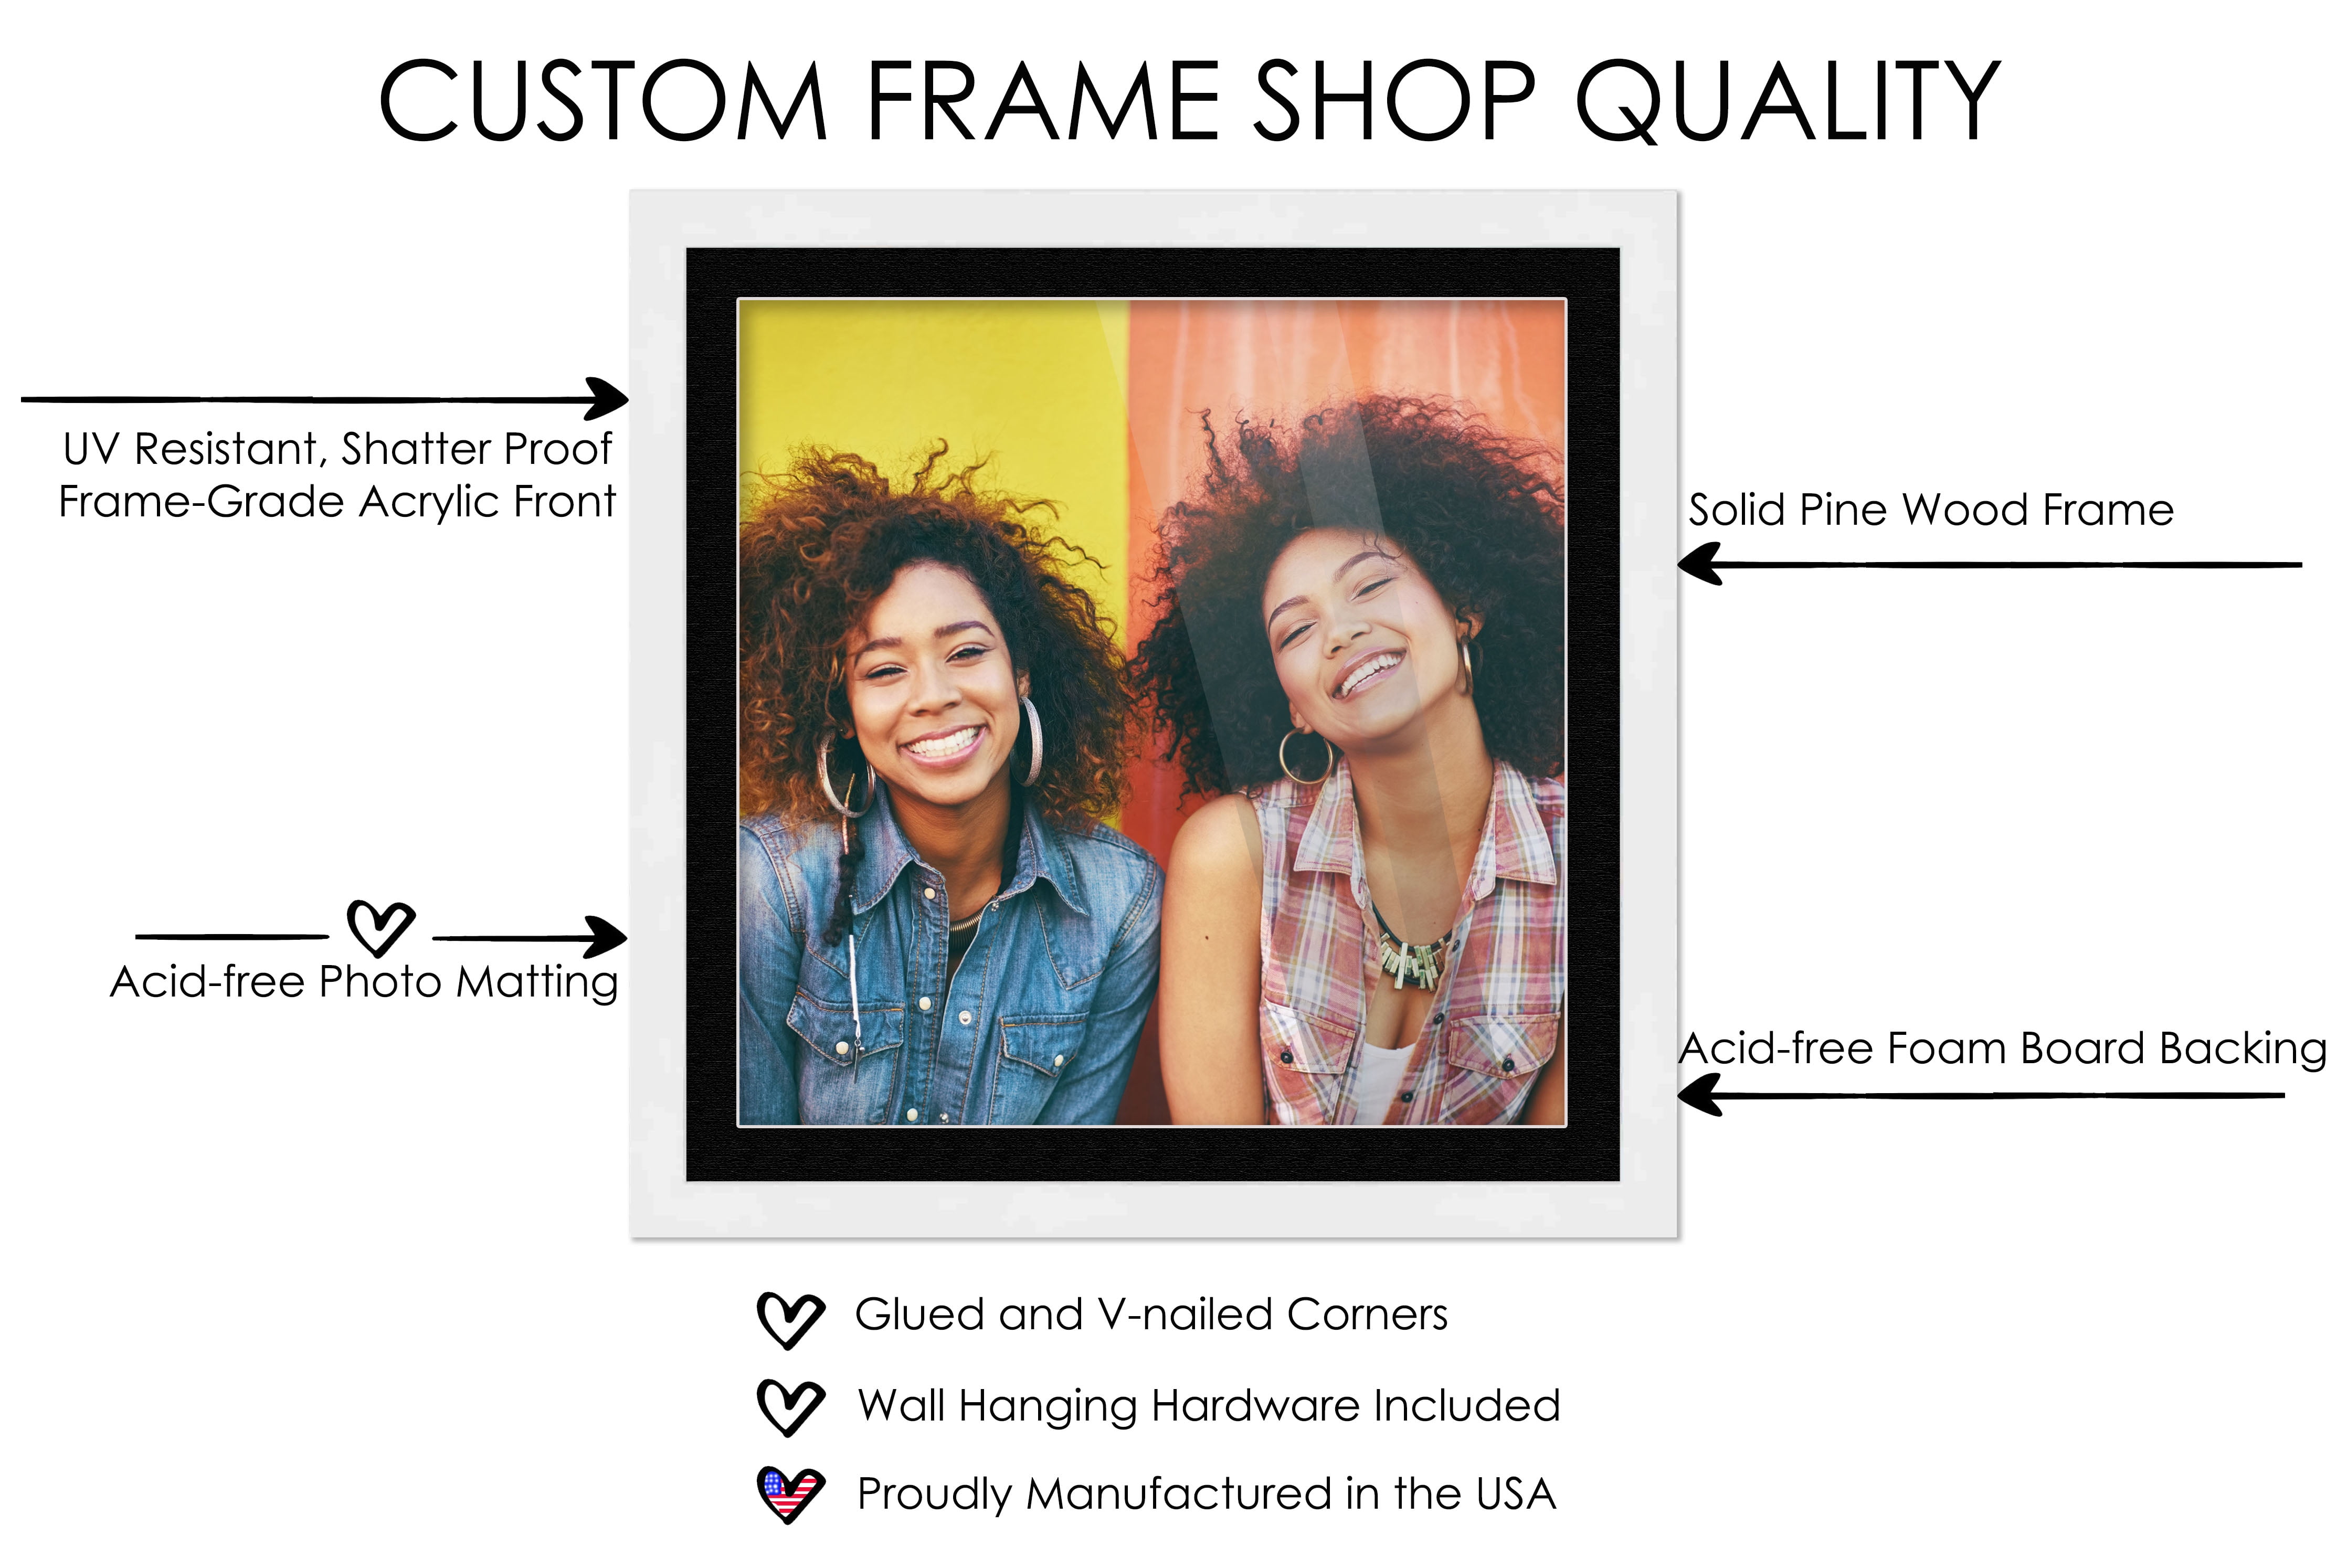 12x12 Frame with Mat - White 15x15 Frame Wood Made to Display Print or Poster Measuring 12 x 12 Inches with White Photo Mat